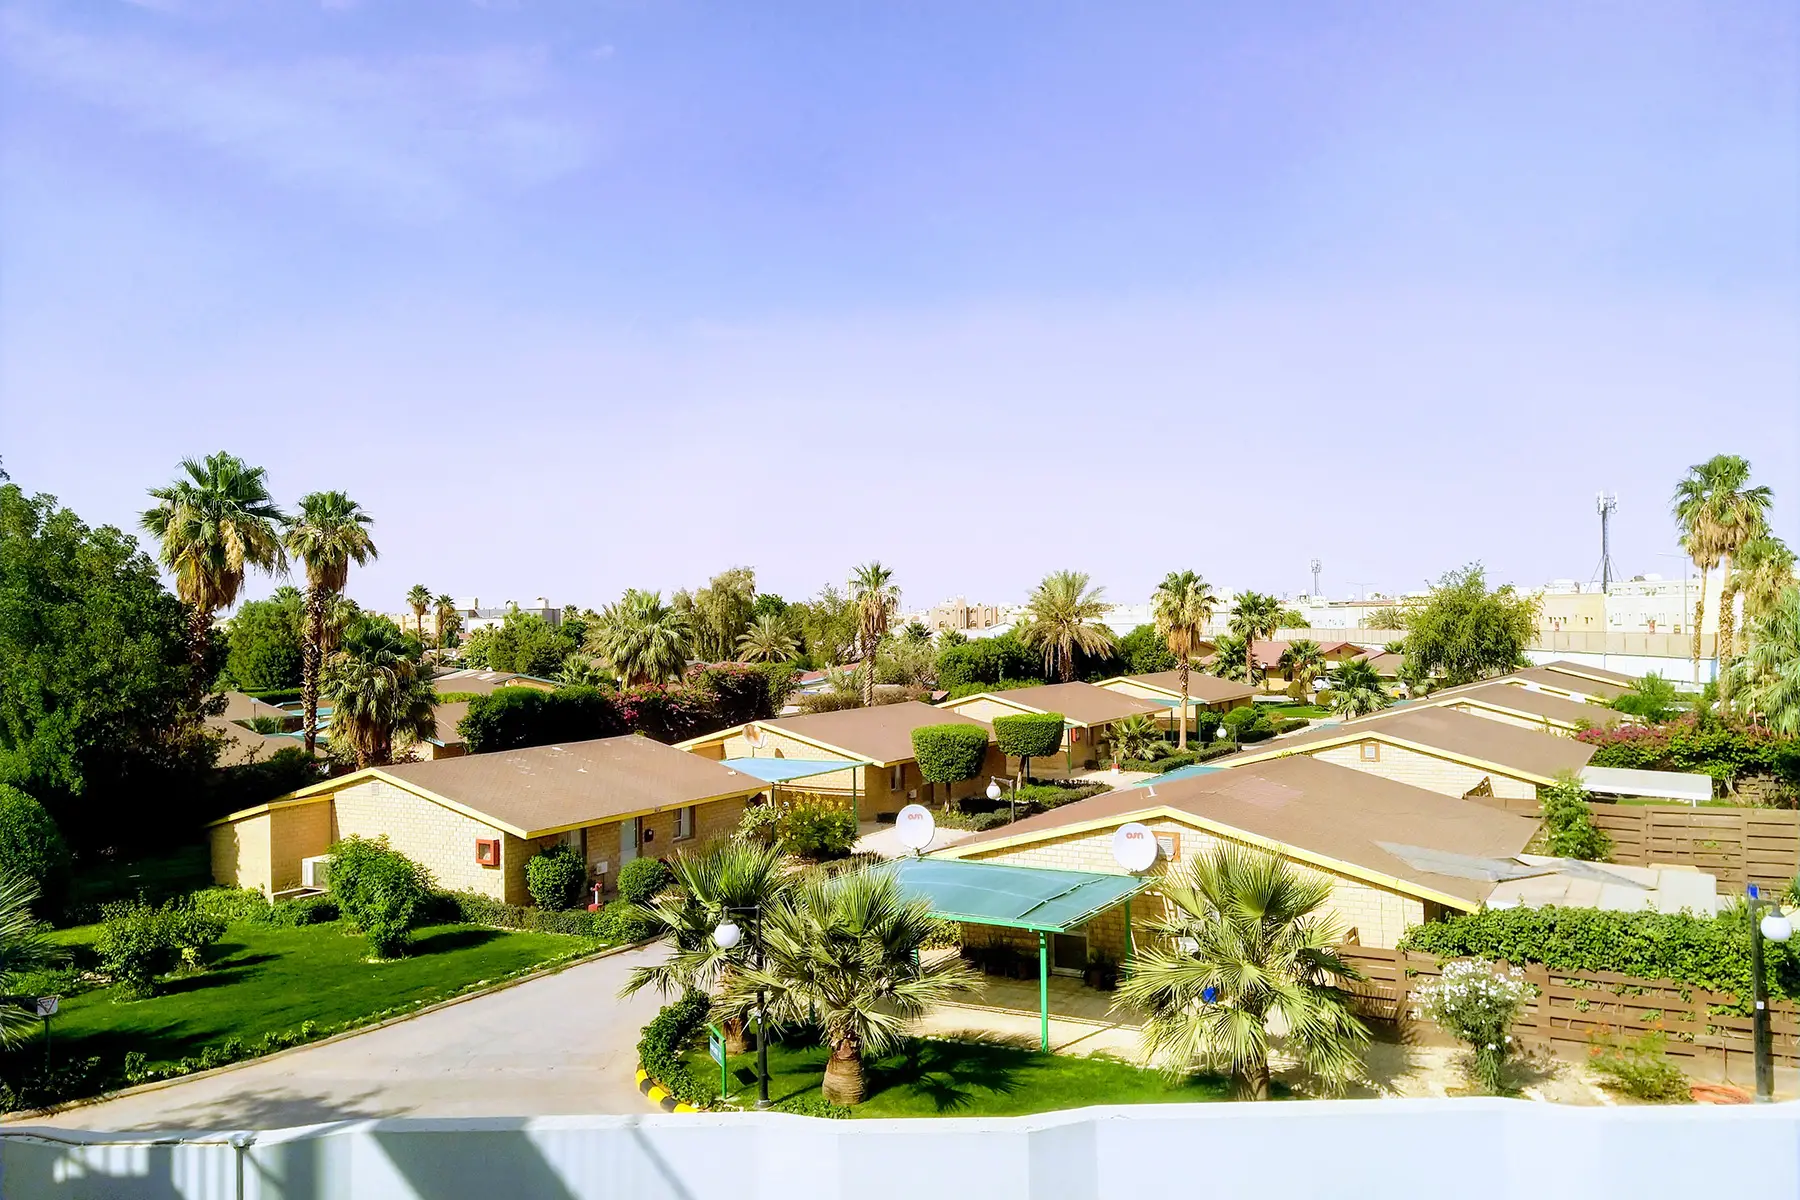 Typical compound housing in Saudi Arabia